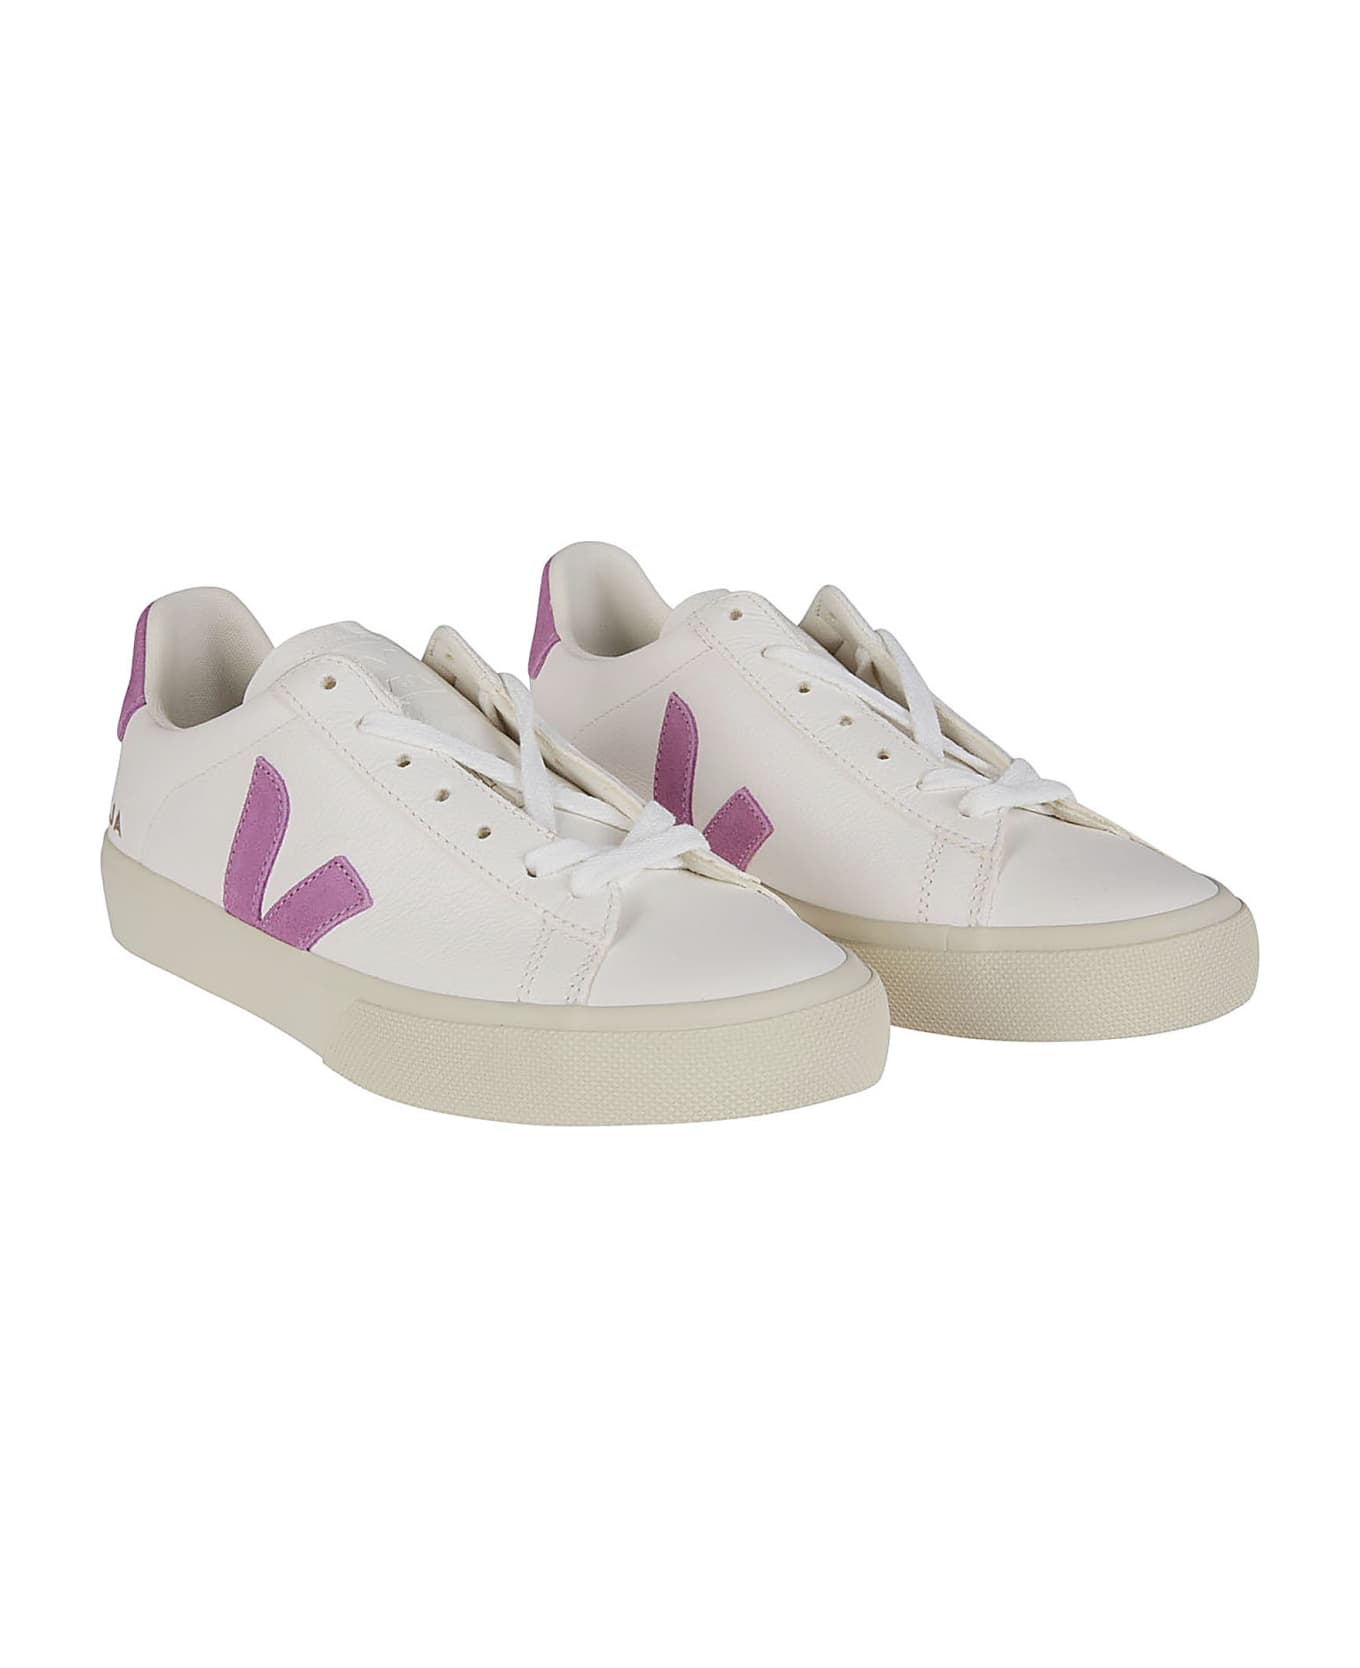 Veja Campo Sneakers - Extra White/mulberry スニーカー